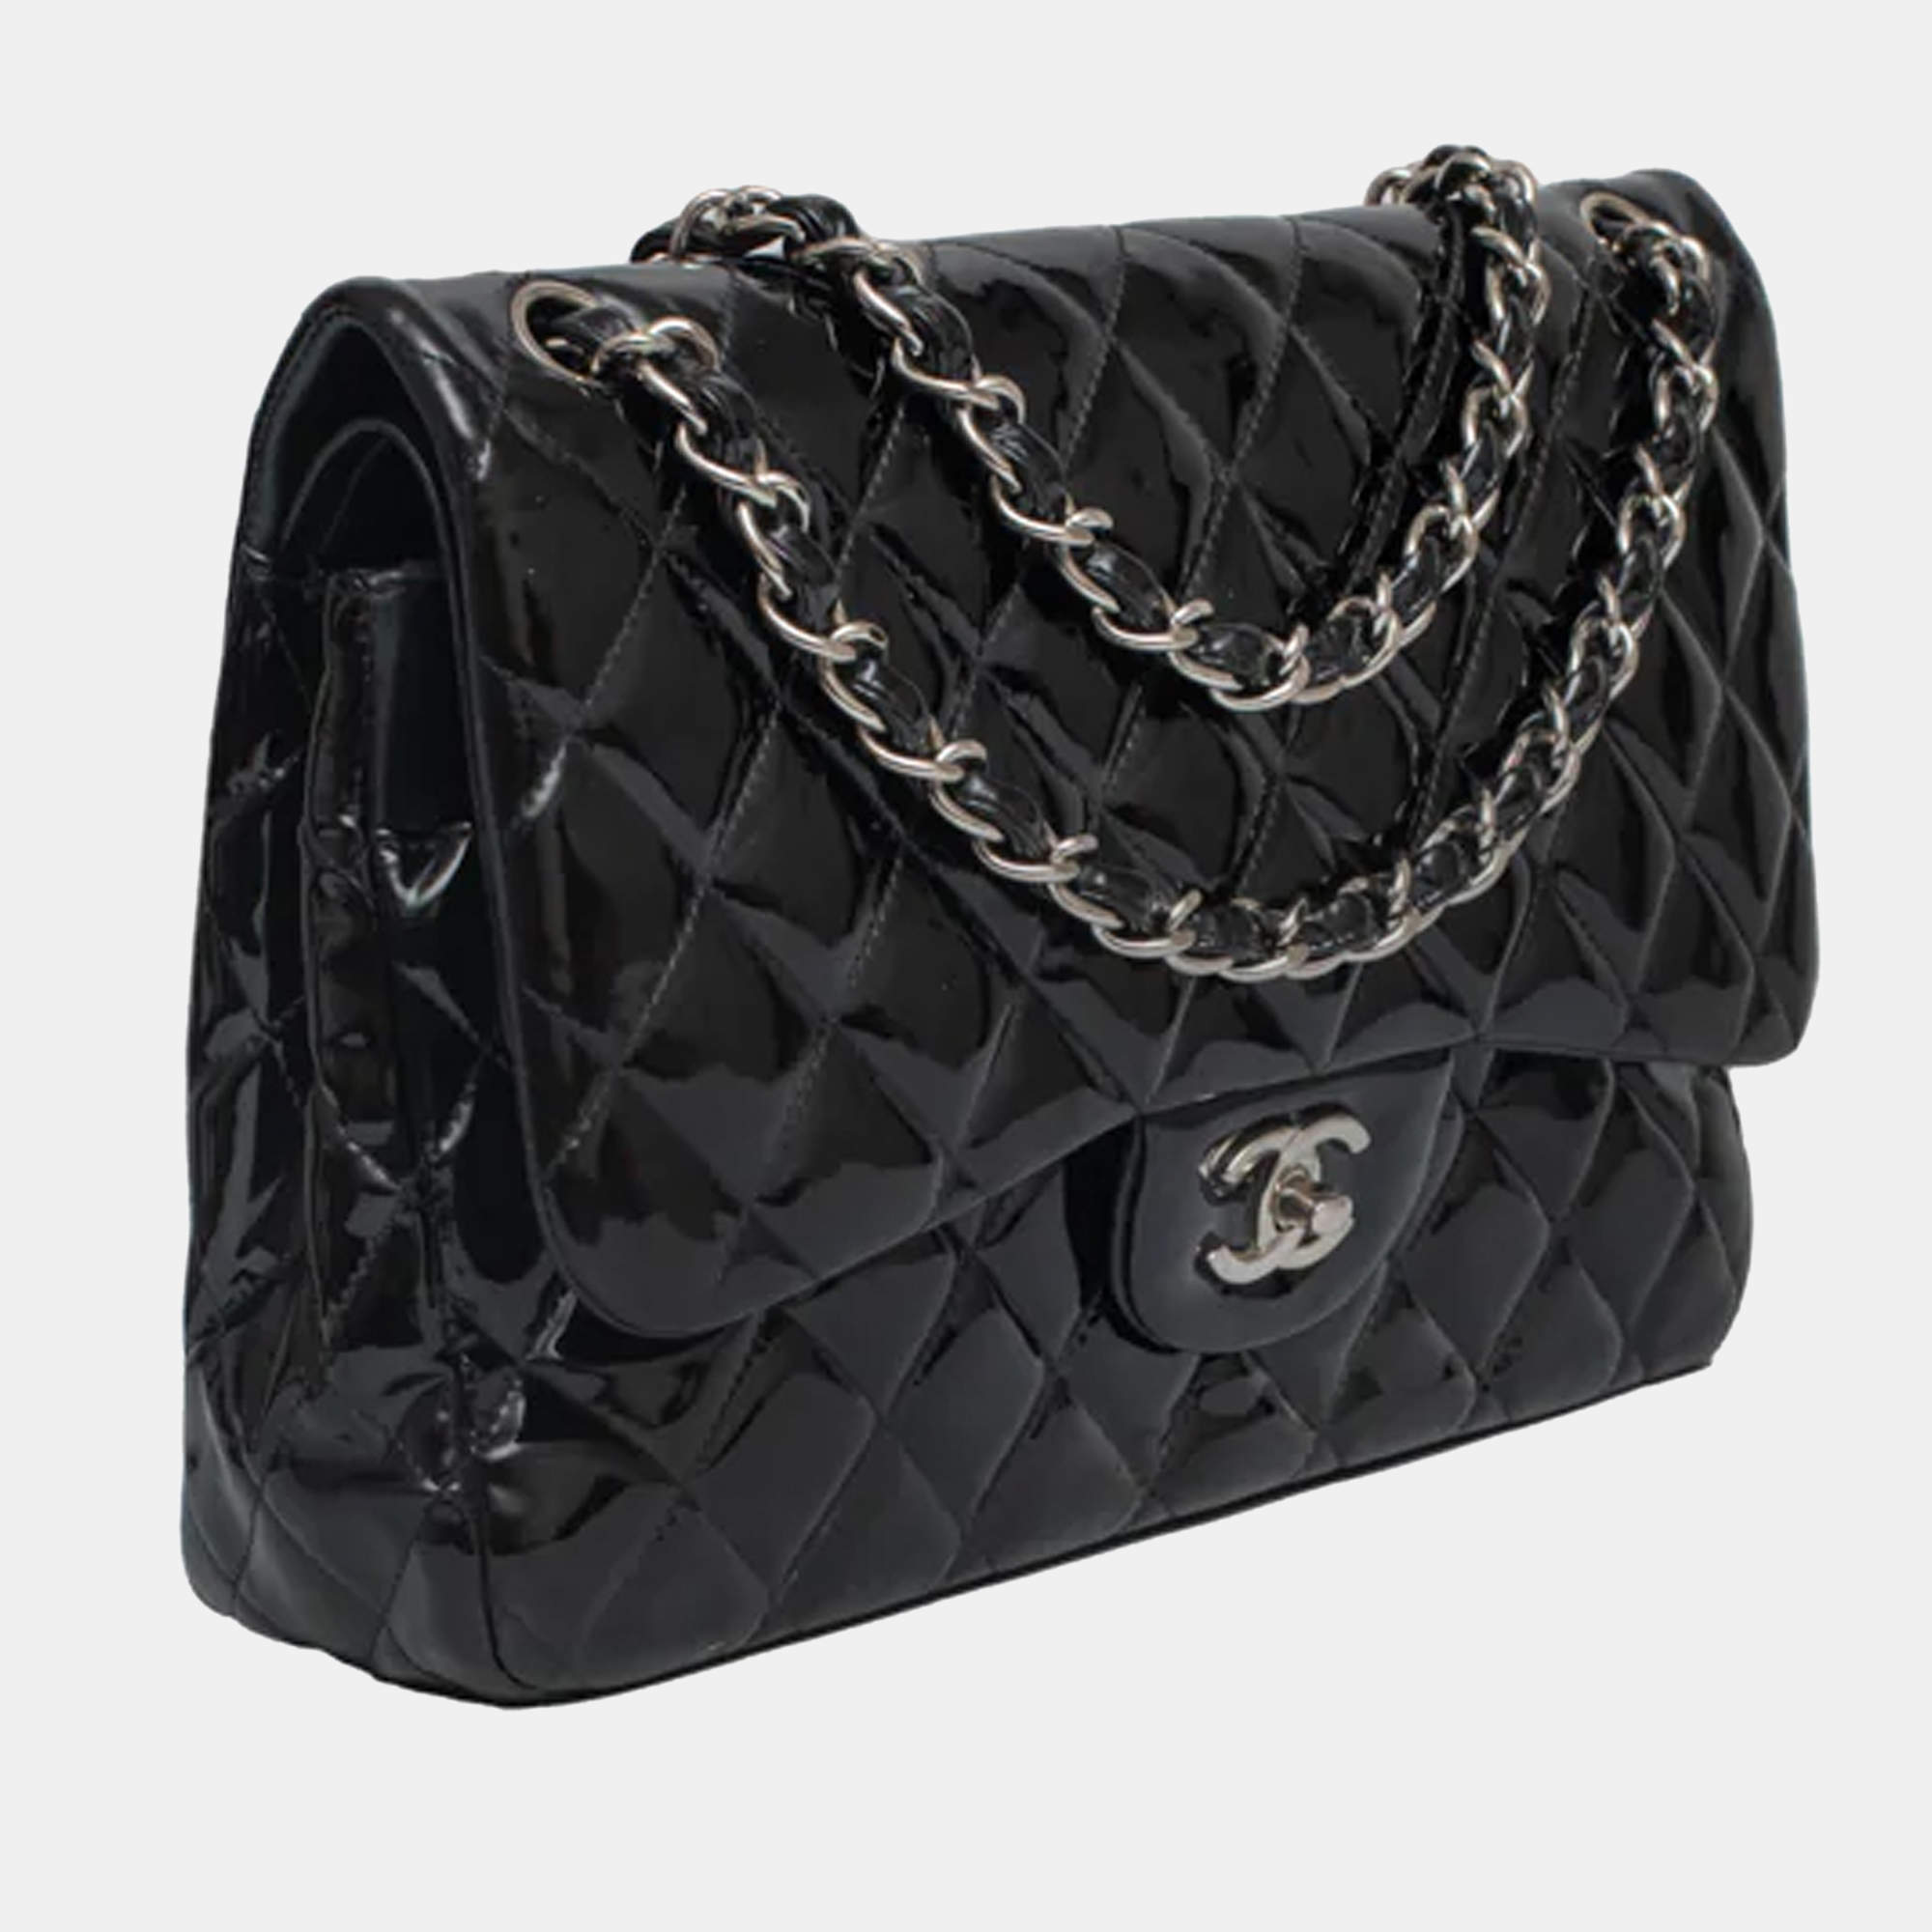 CHANEL, Bags, Chanel Classic Black Patent Leather Bag Jumbo